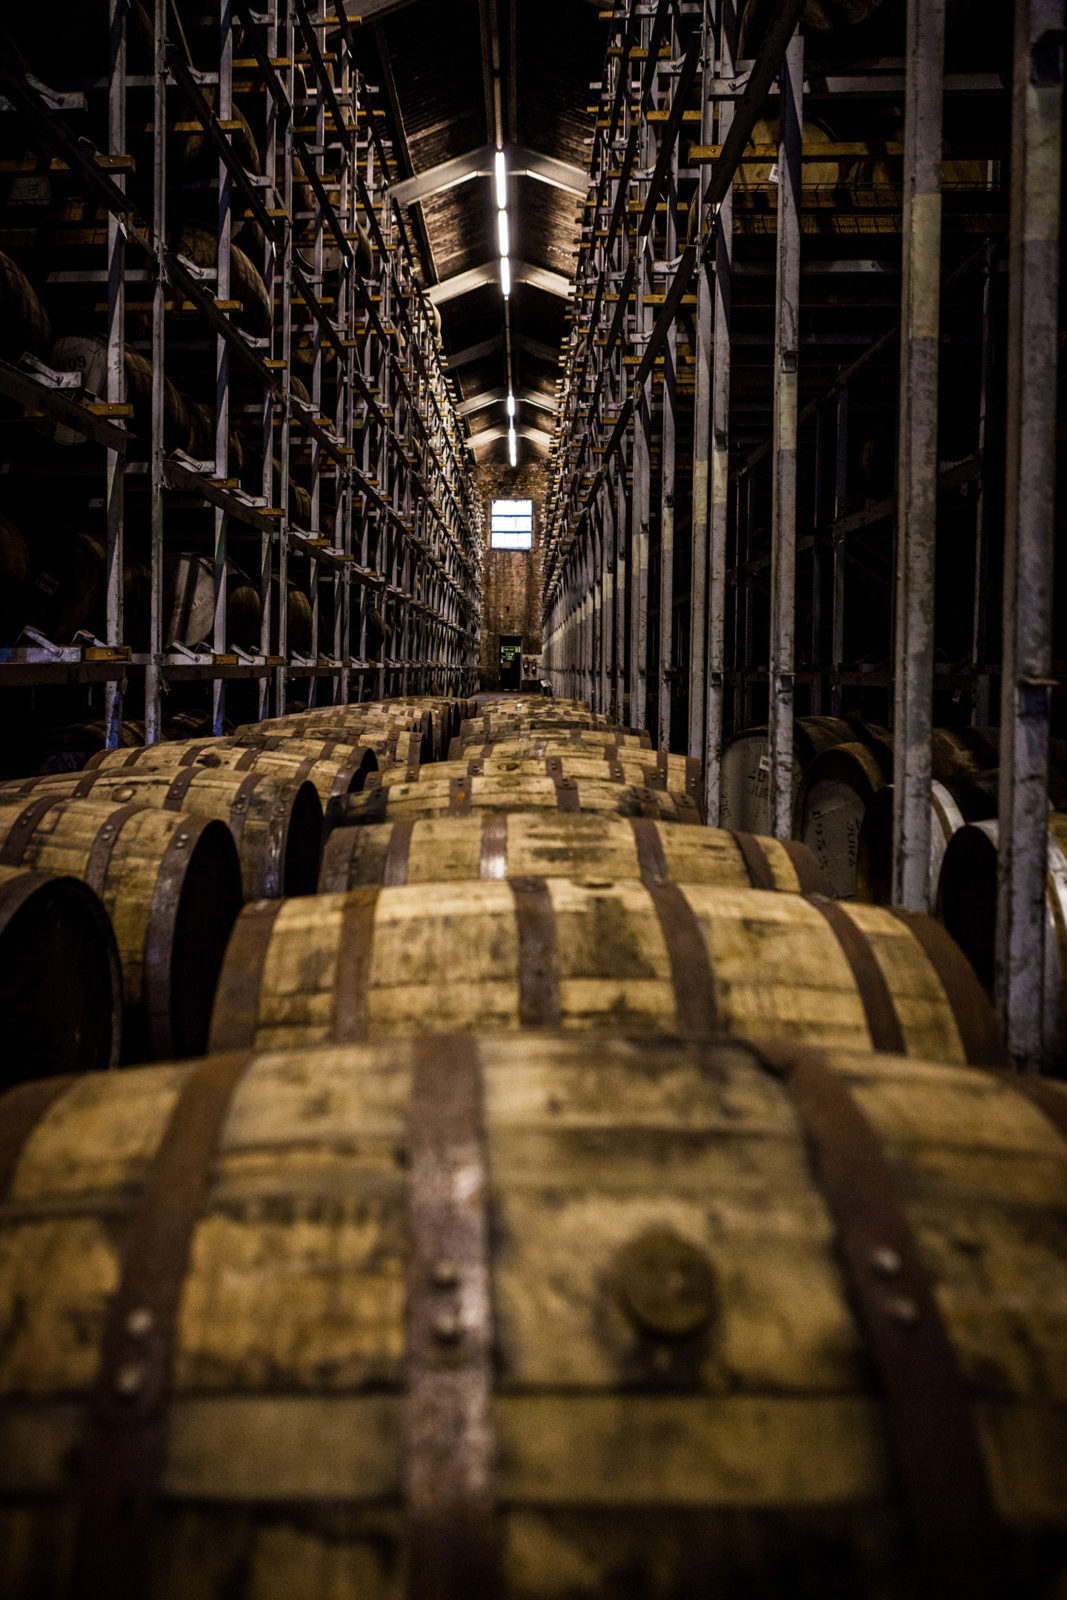 Whisky Casks Stored At Distillery Warehouse in Scotland